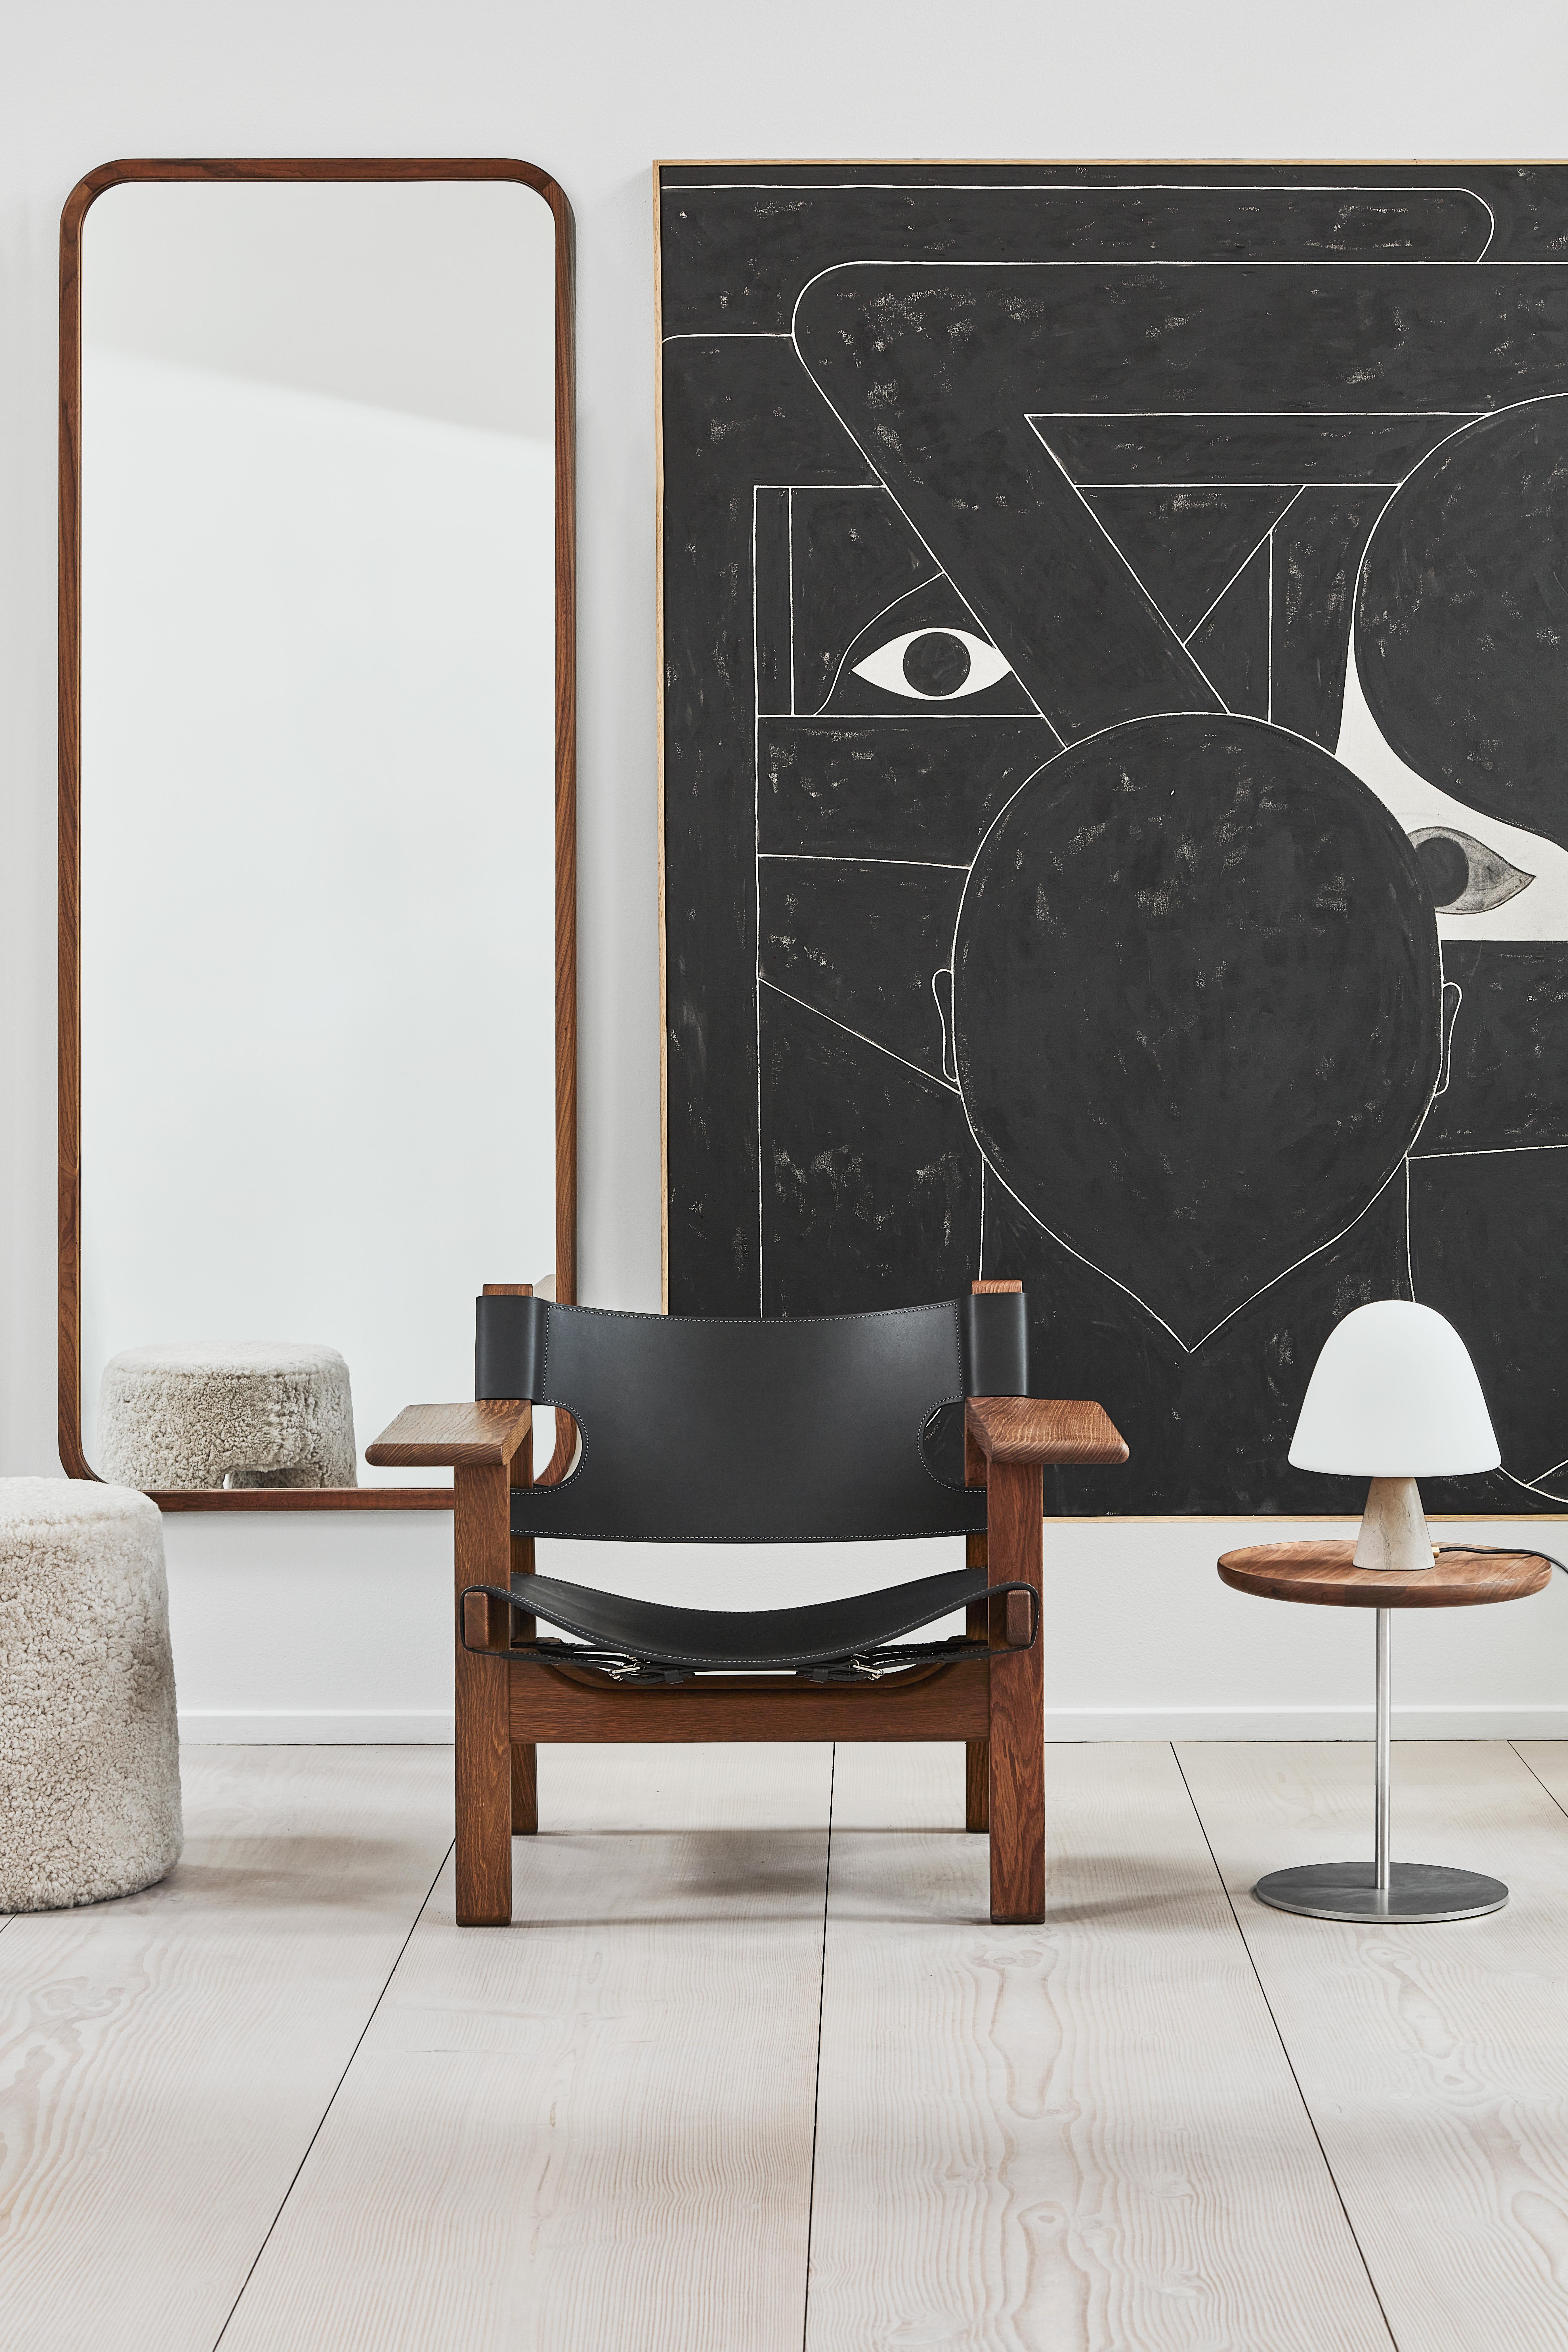 The iconic Spanish chair is Børge Mogensen’s masterful contribution to modern design, designed for Fredericia in 1958. Solid oak or walnut combined with the highest caliber saddle leather creates a strong presence in a chair that will only become